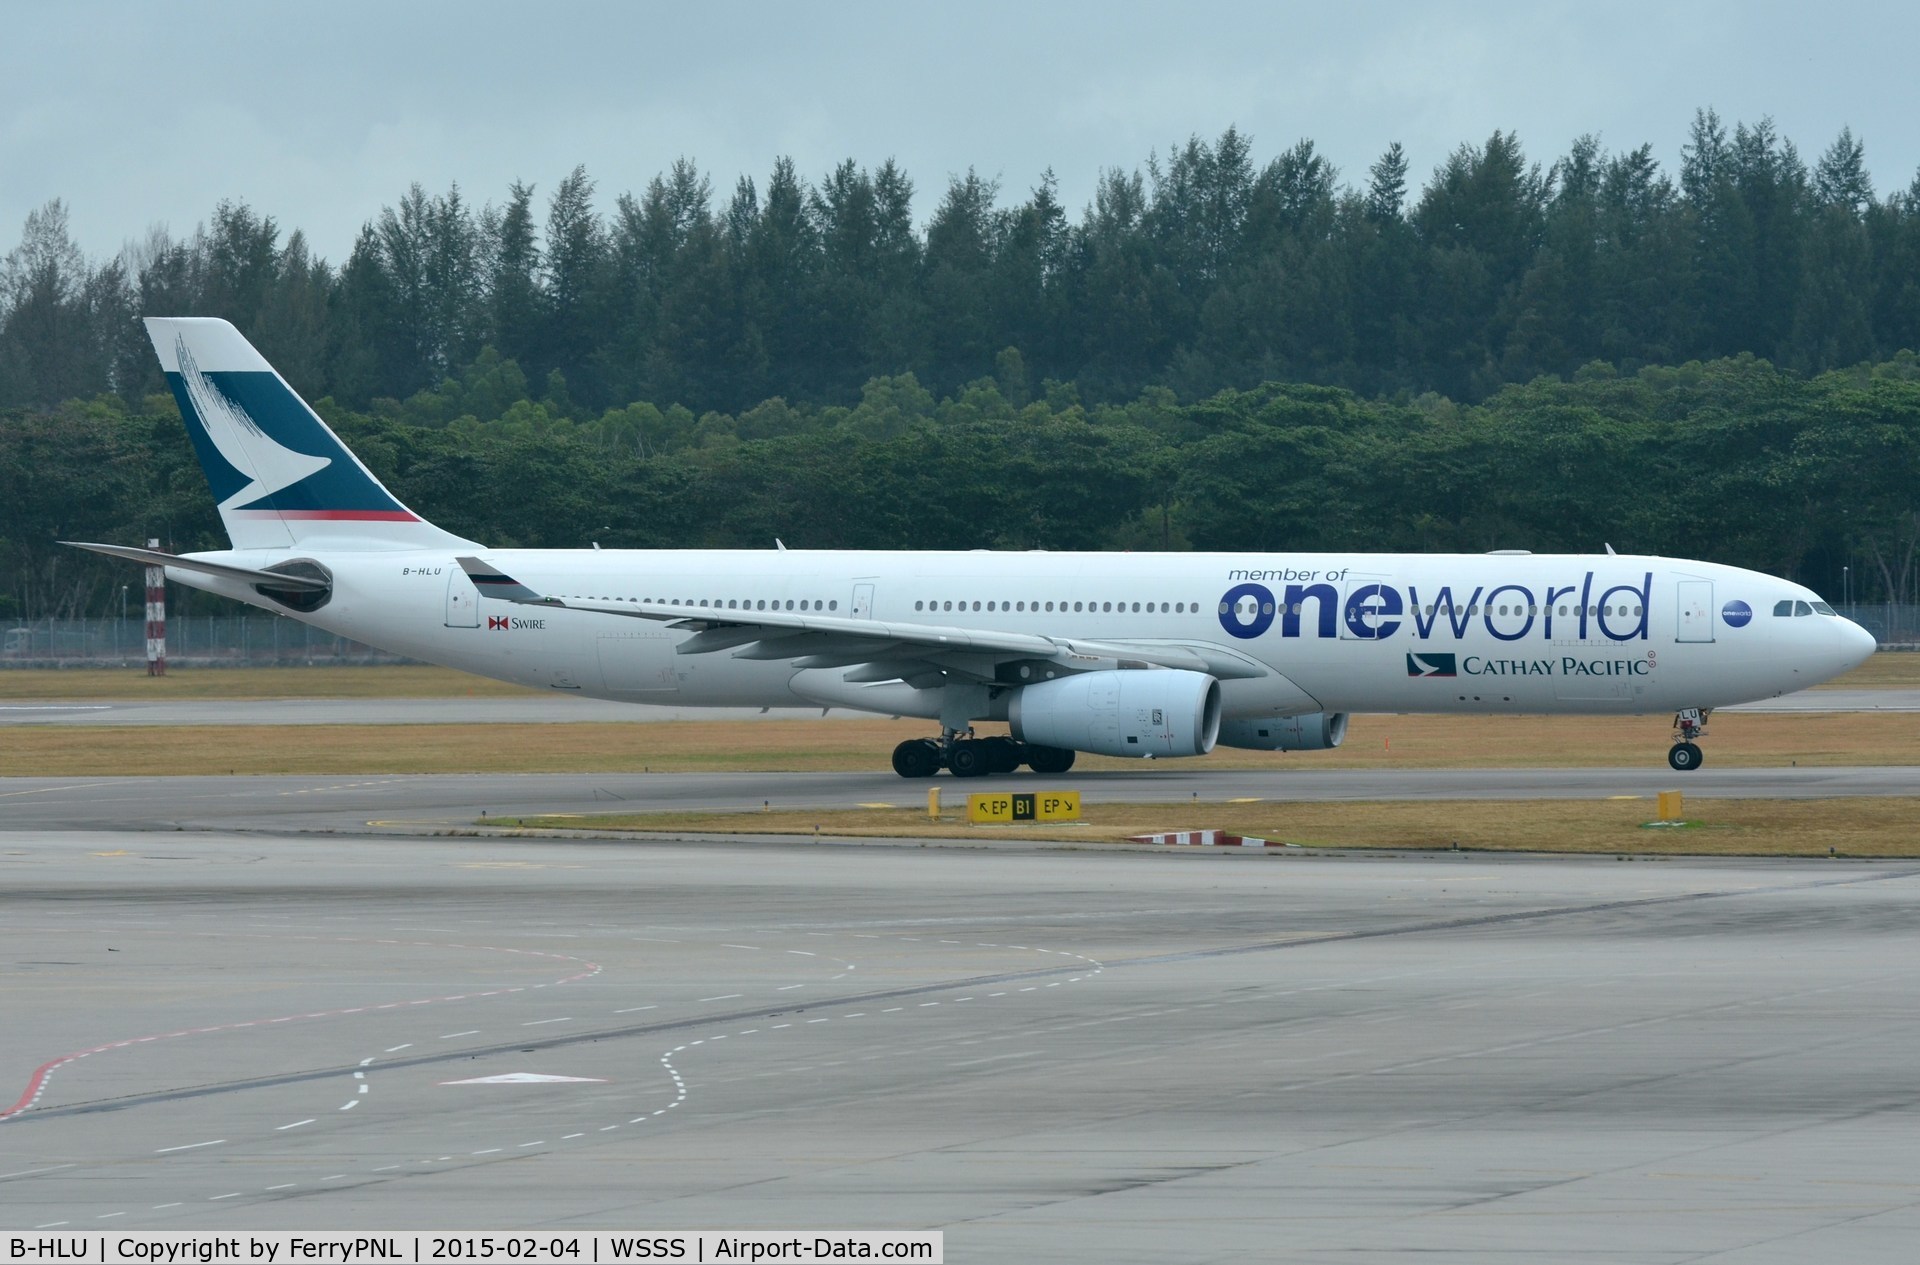 B-HLU, 2003 Airbus A330-343 C/N 539, Cathay A33 with Oneworld titles.